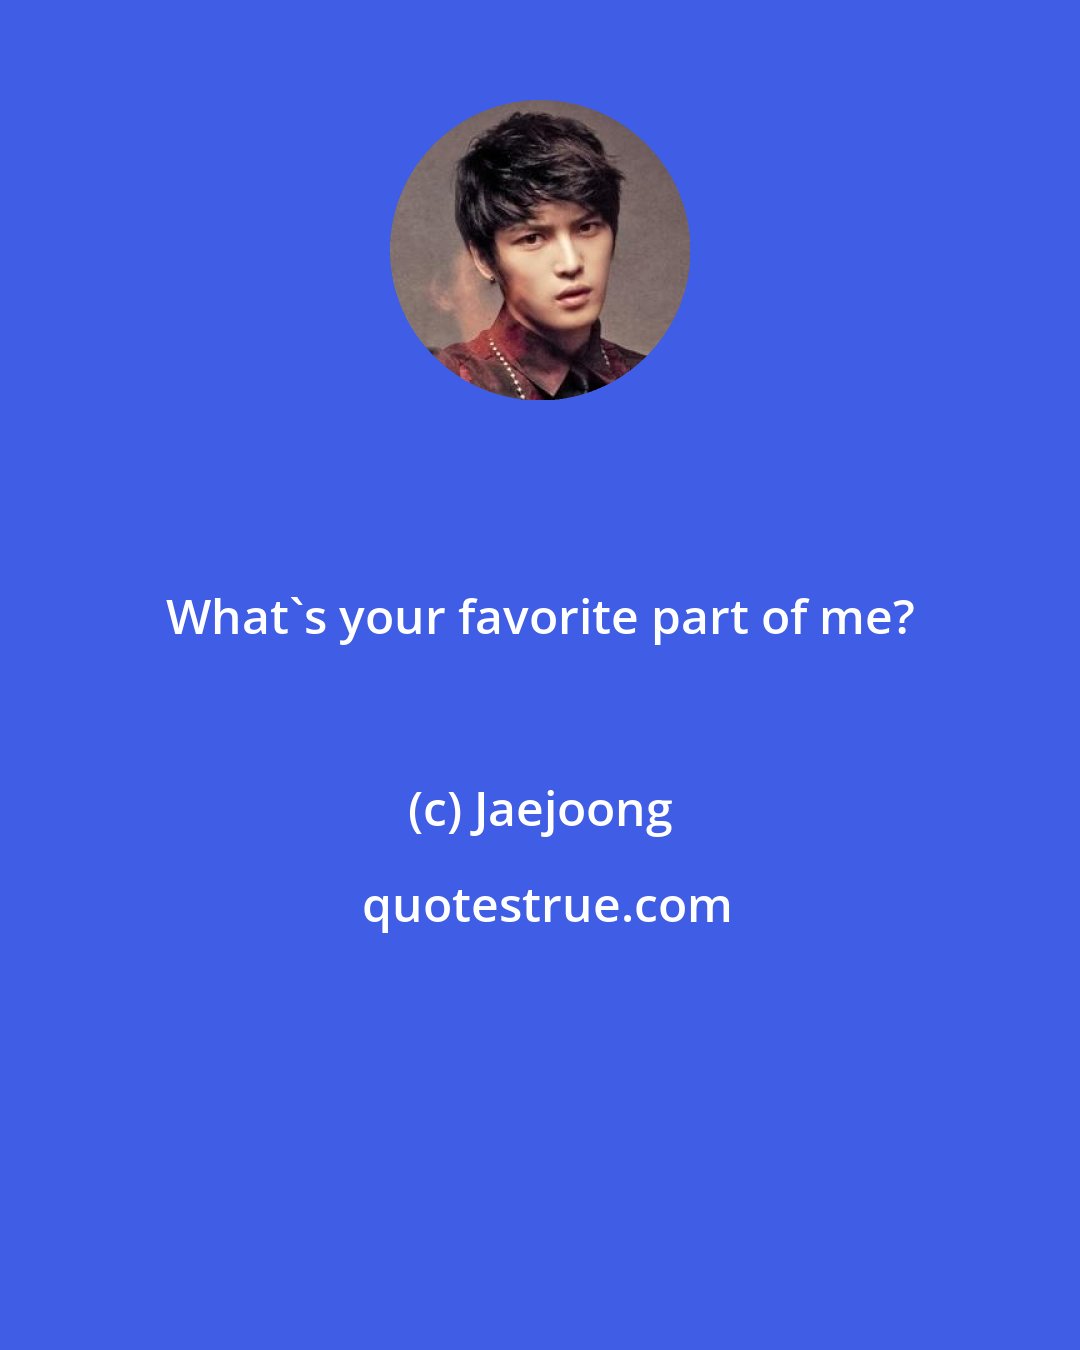 Jaejoong: What's your favorite part of me?